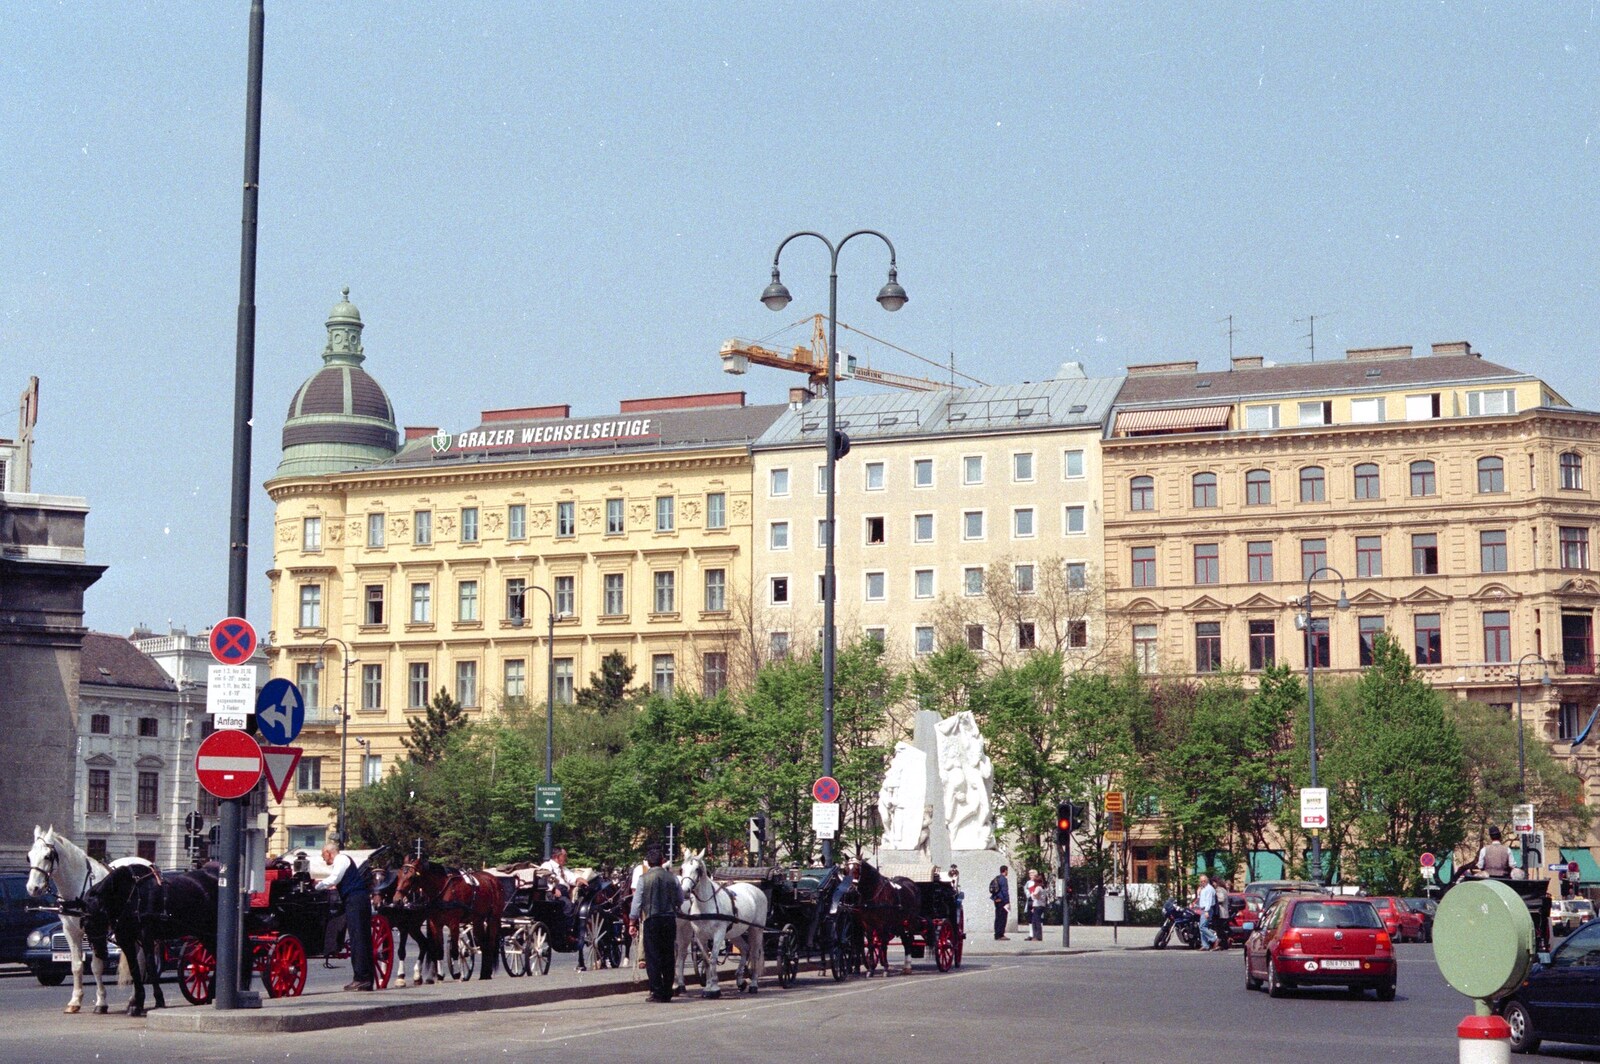 A load of horses-and-carts wait for tourists from A Postcard From Hofburg Palace, Vienna, Austria - 18th April 2000